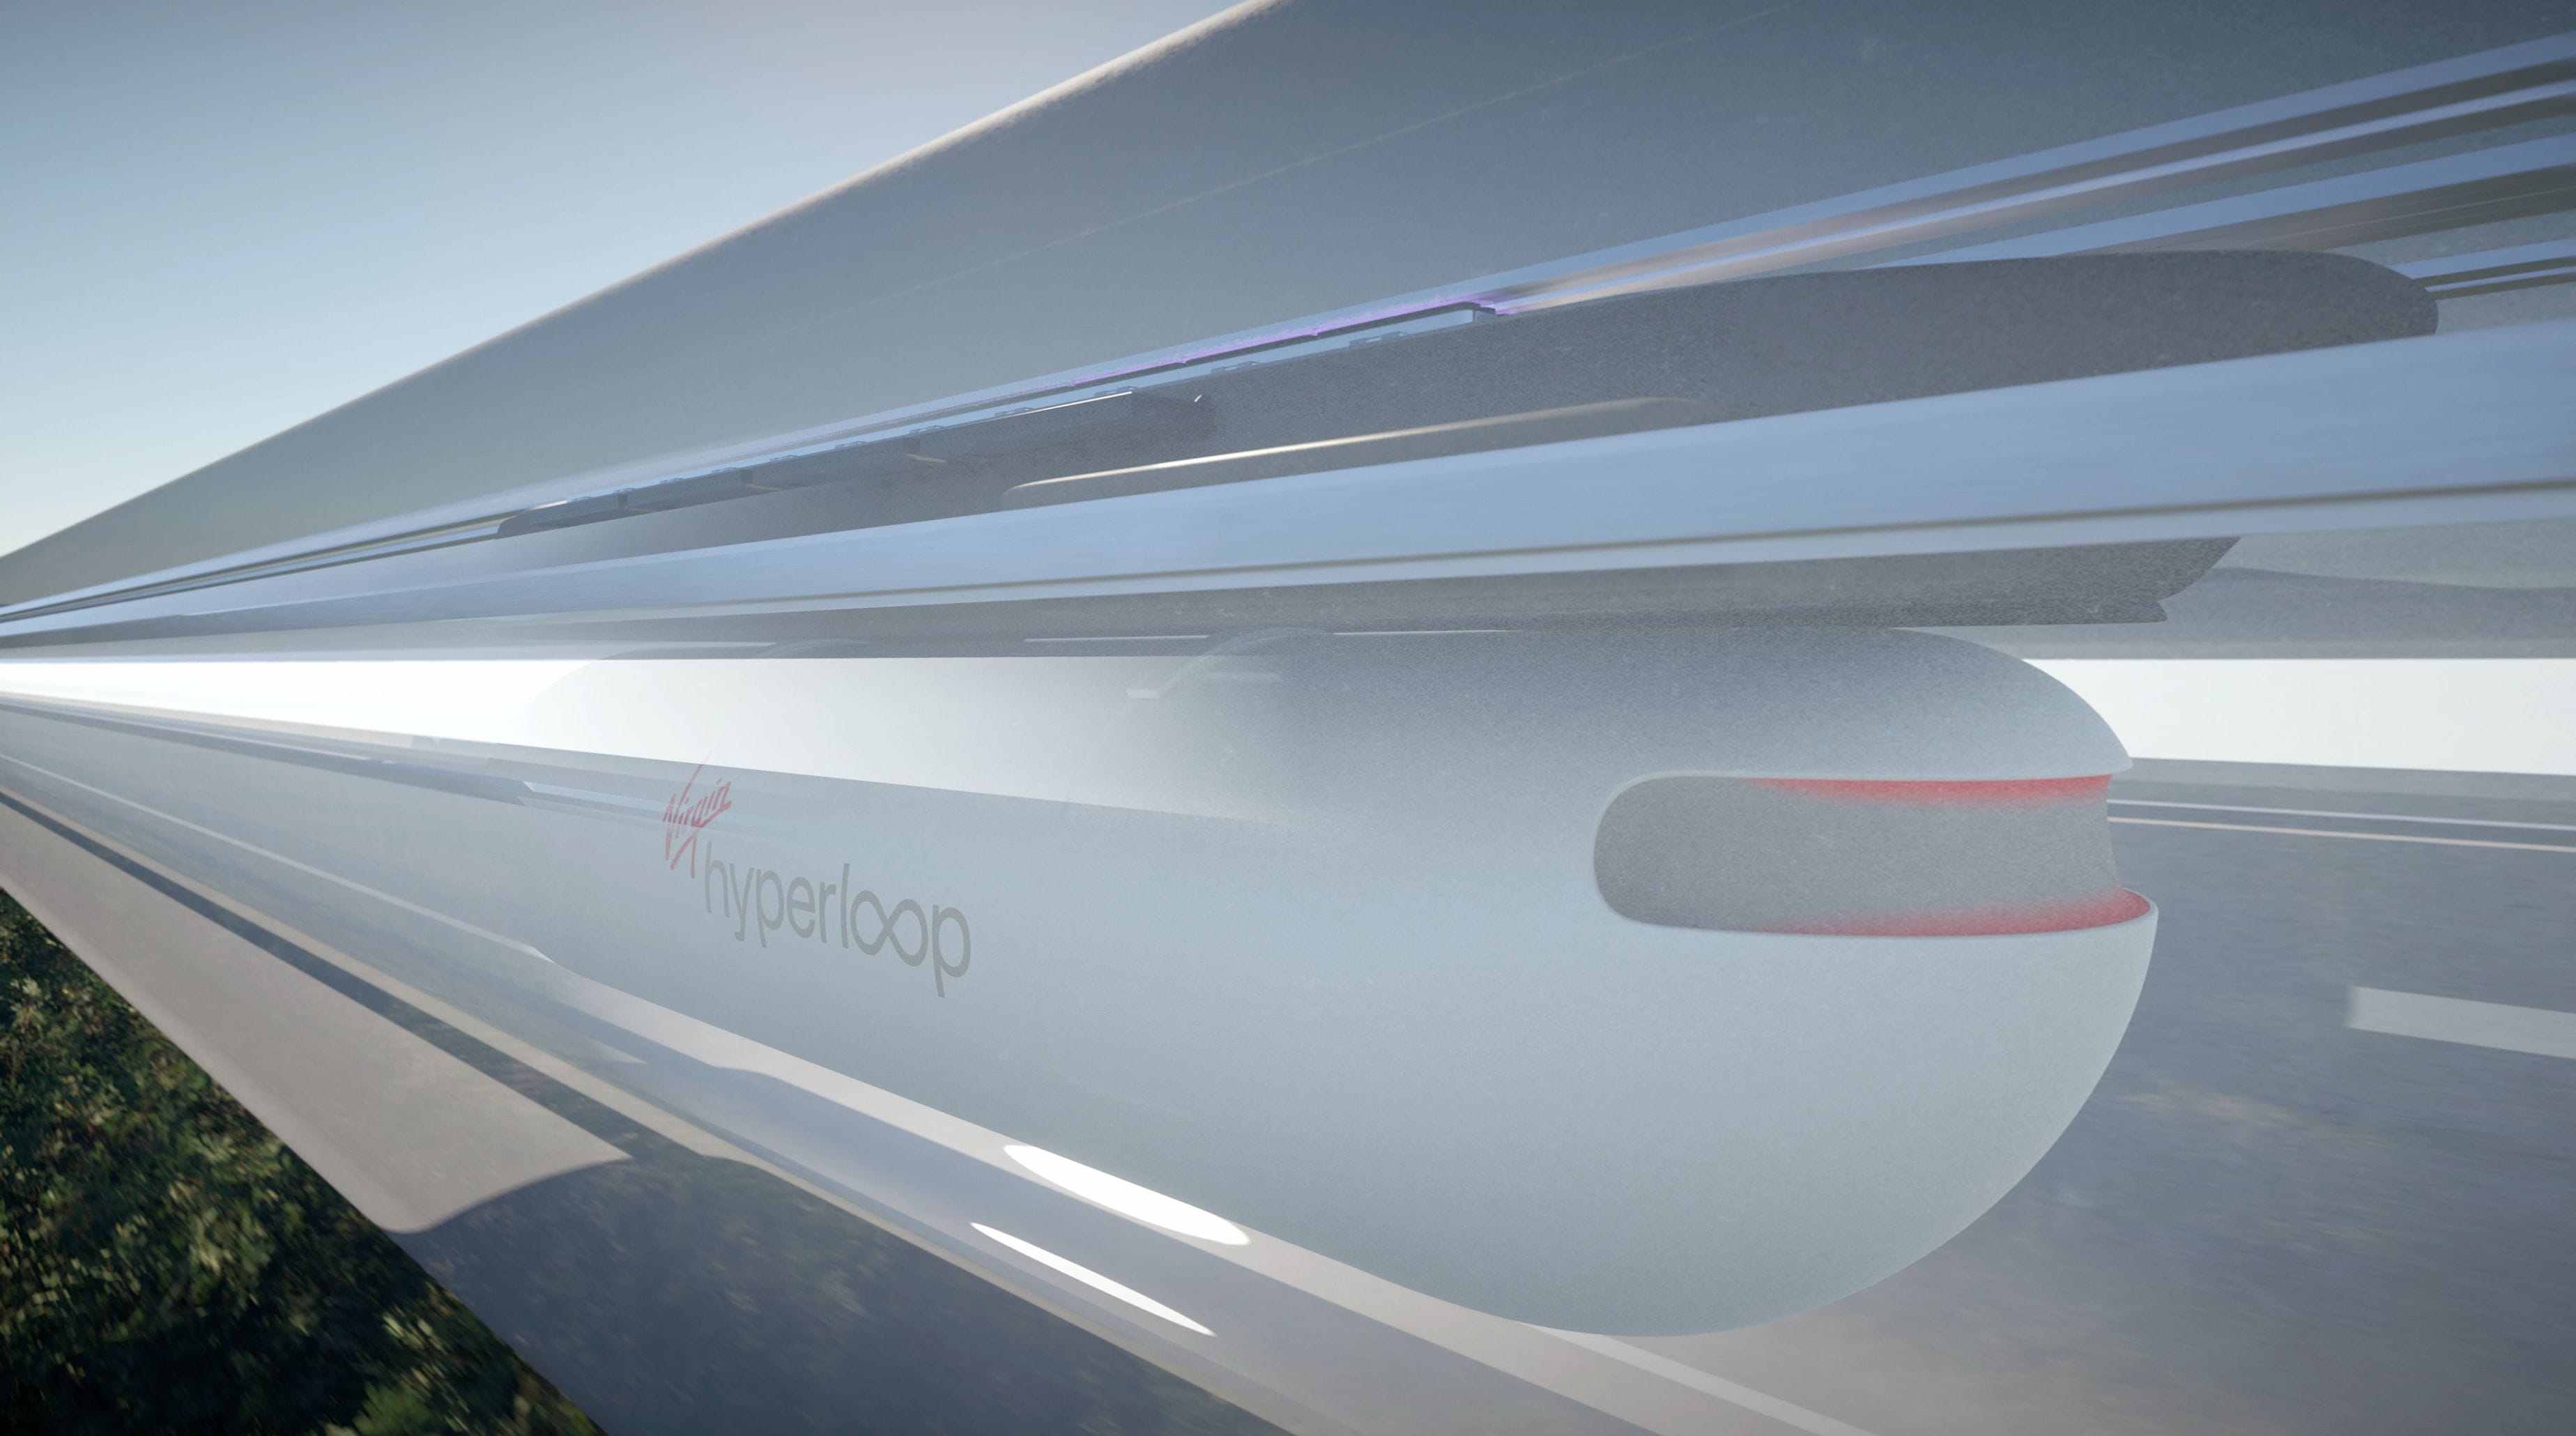 Virgin Hyperloop shows off the future: mass transport in floating magnetic pods